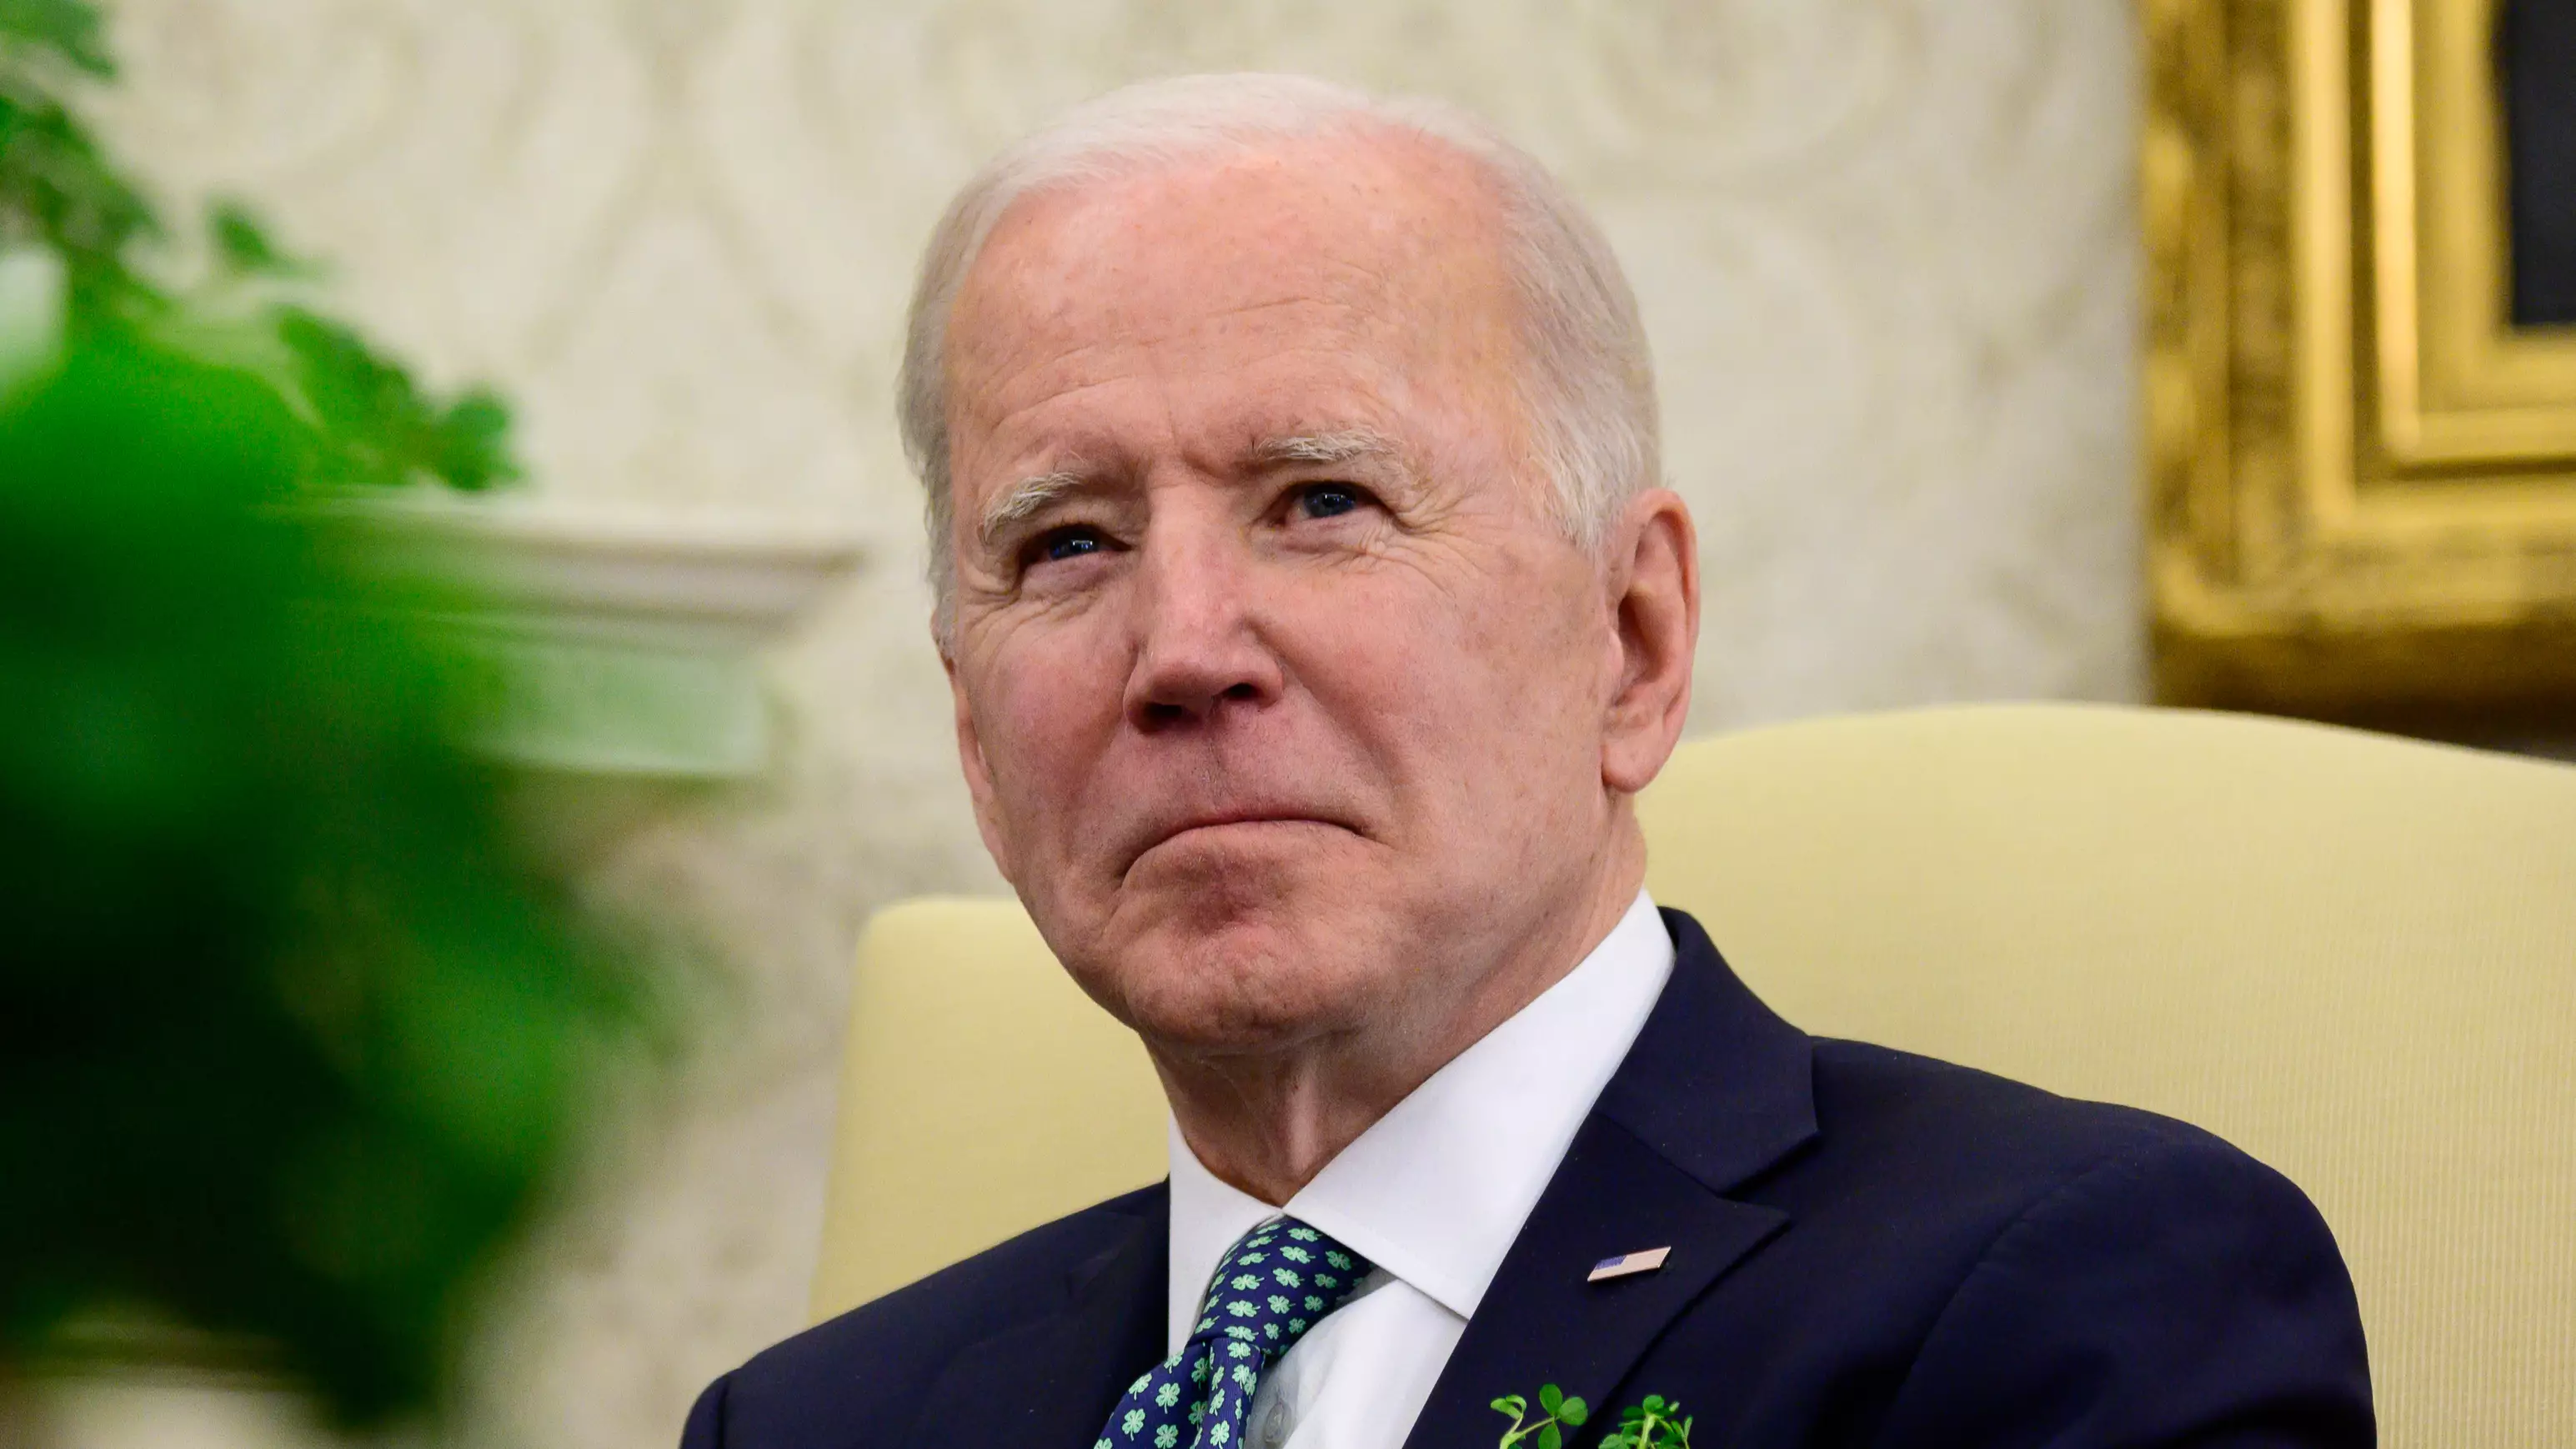 Joe Biden Says Vladimir Putin Will Pay A 'High Price' For Meddling In US Election